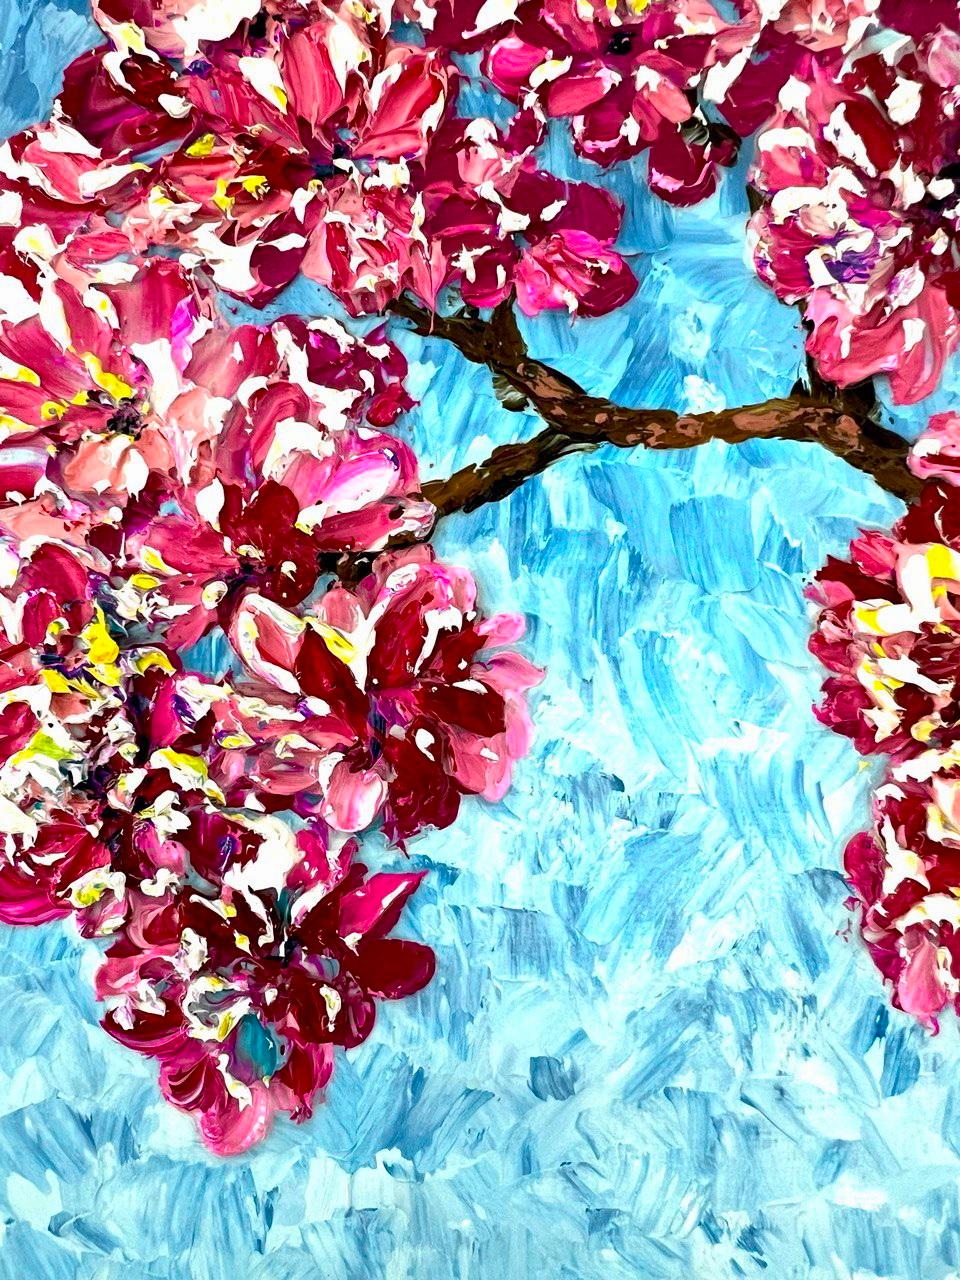             This painting combines the pure beauty of nature with an impressionistic view of spring. Blooming can't just be seen, it can be felt. This art work vibrates with the energy of nature’s renewal, awakens our dreams and hopes for